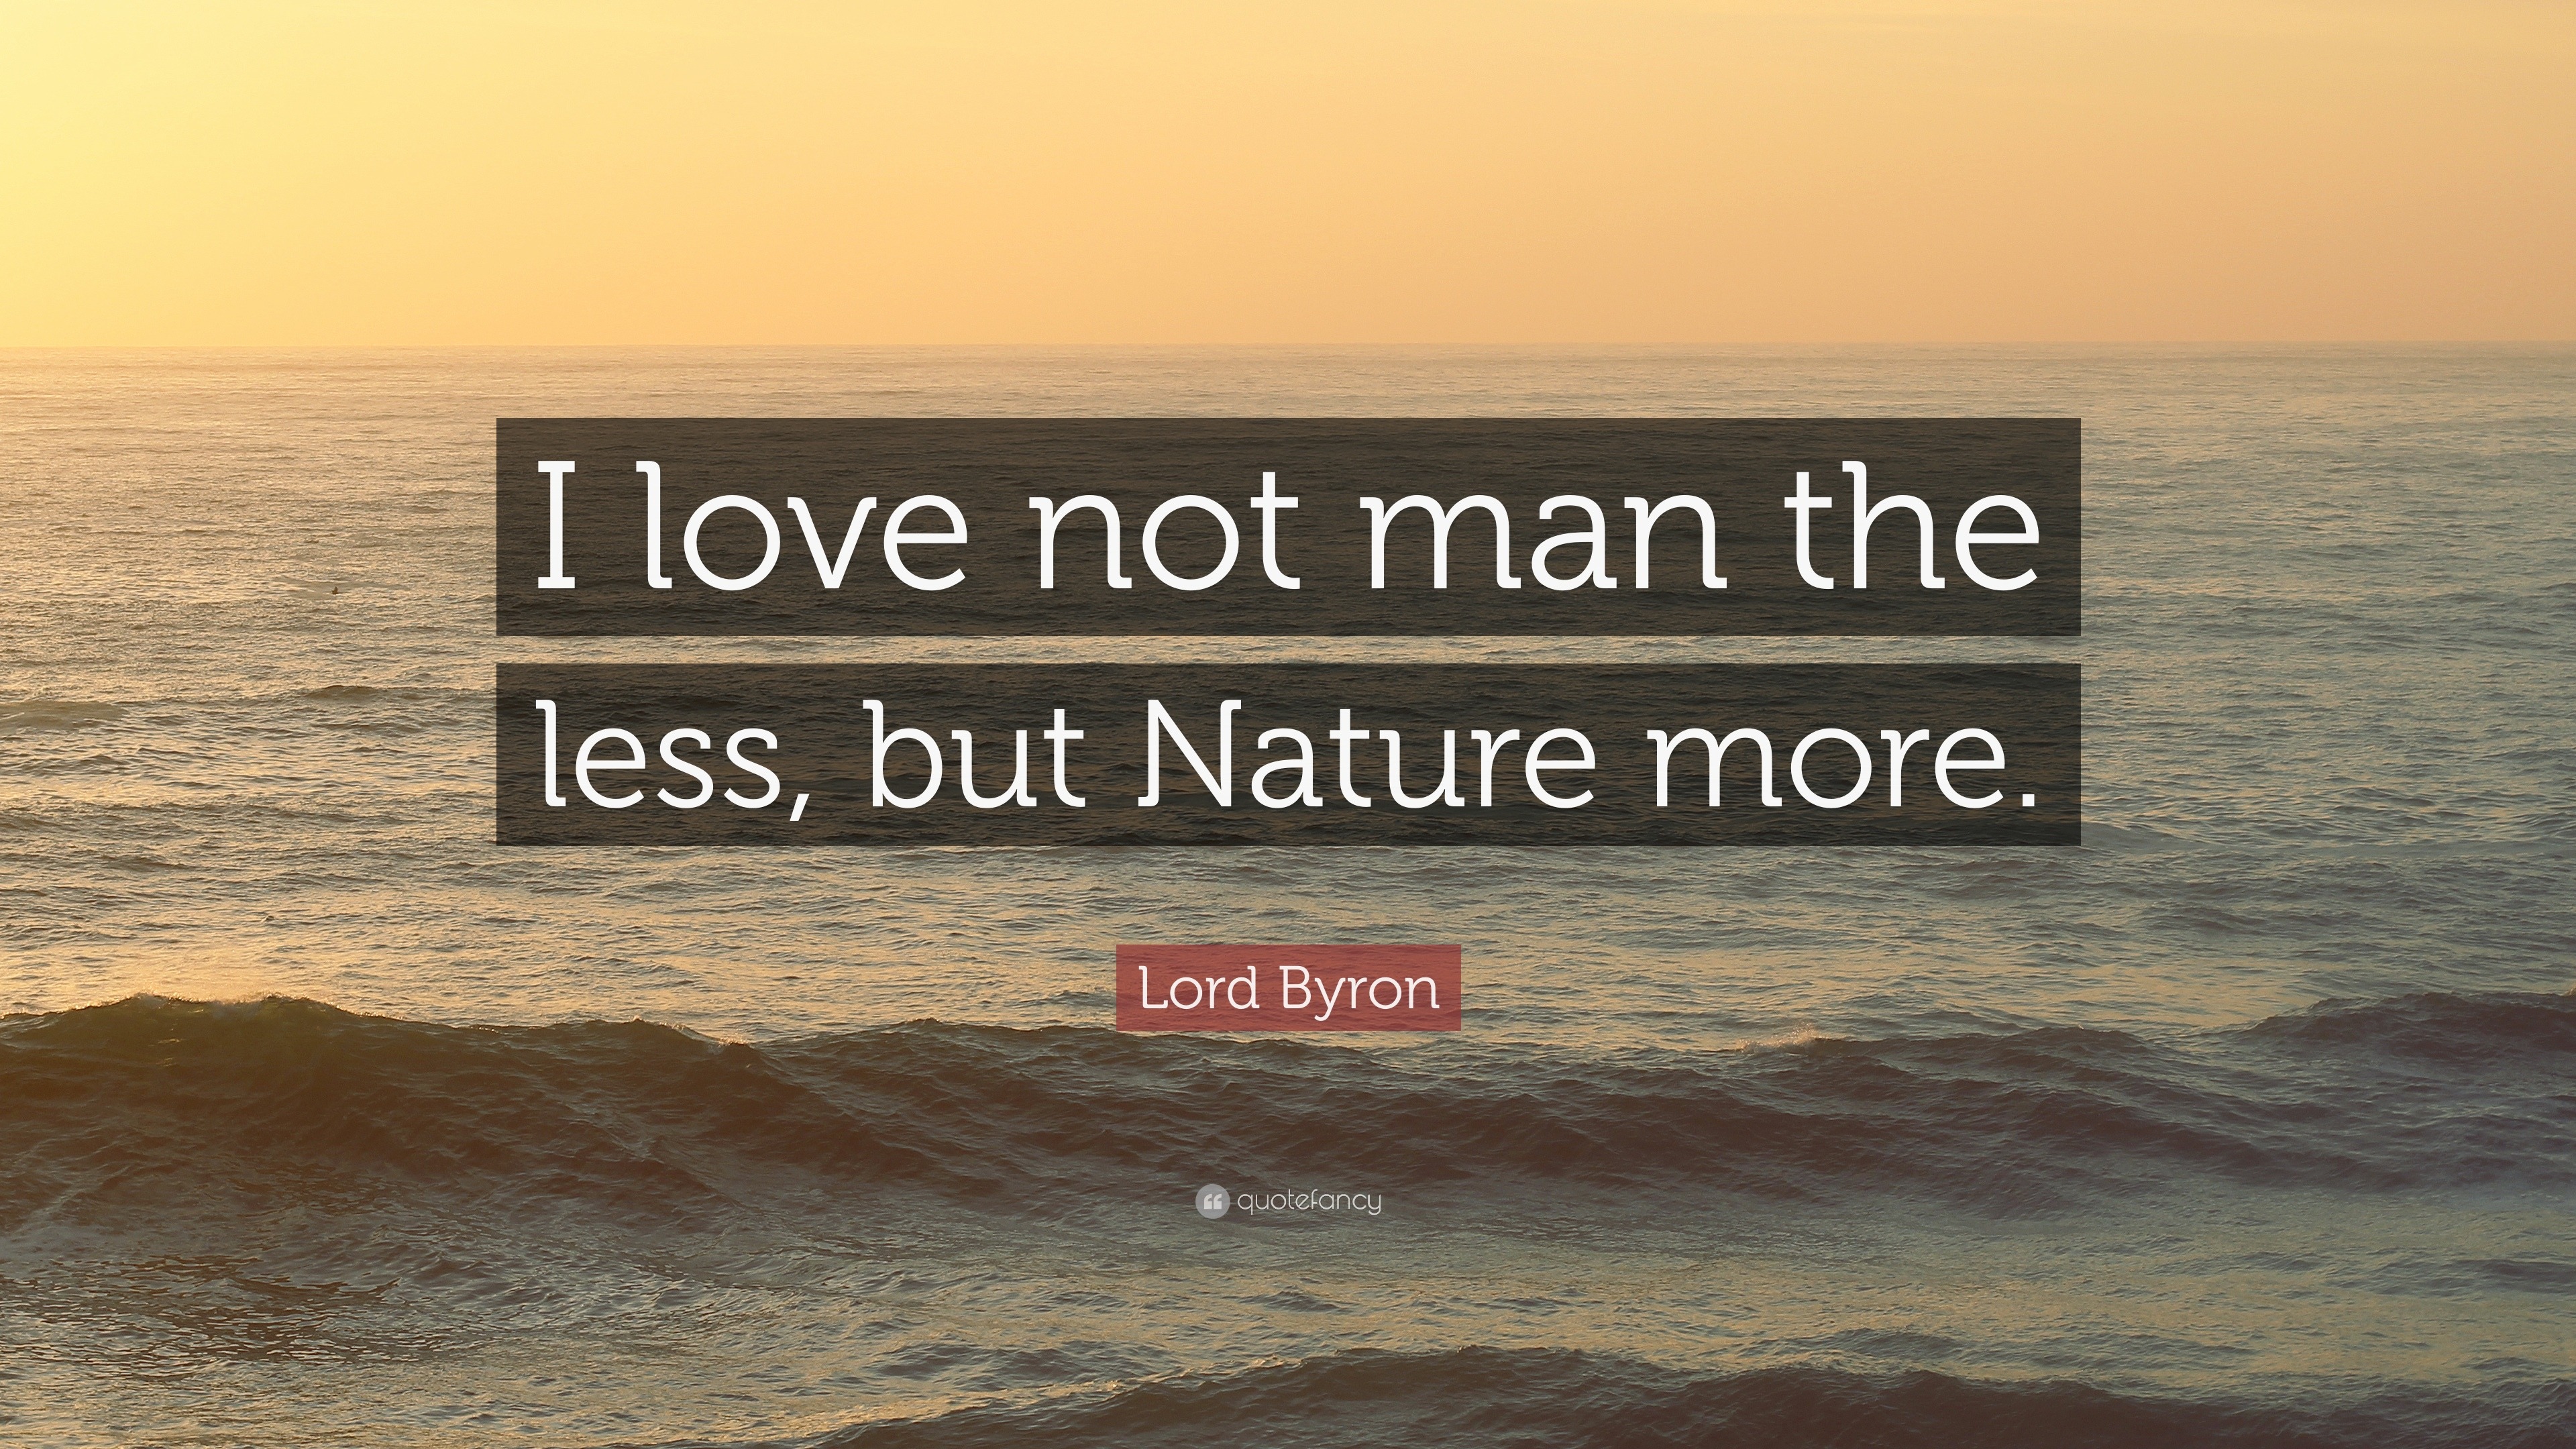 Lord Byron Quote “I love not man the less but Nature more